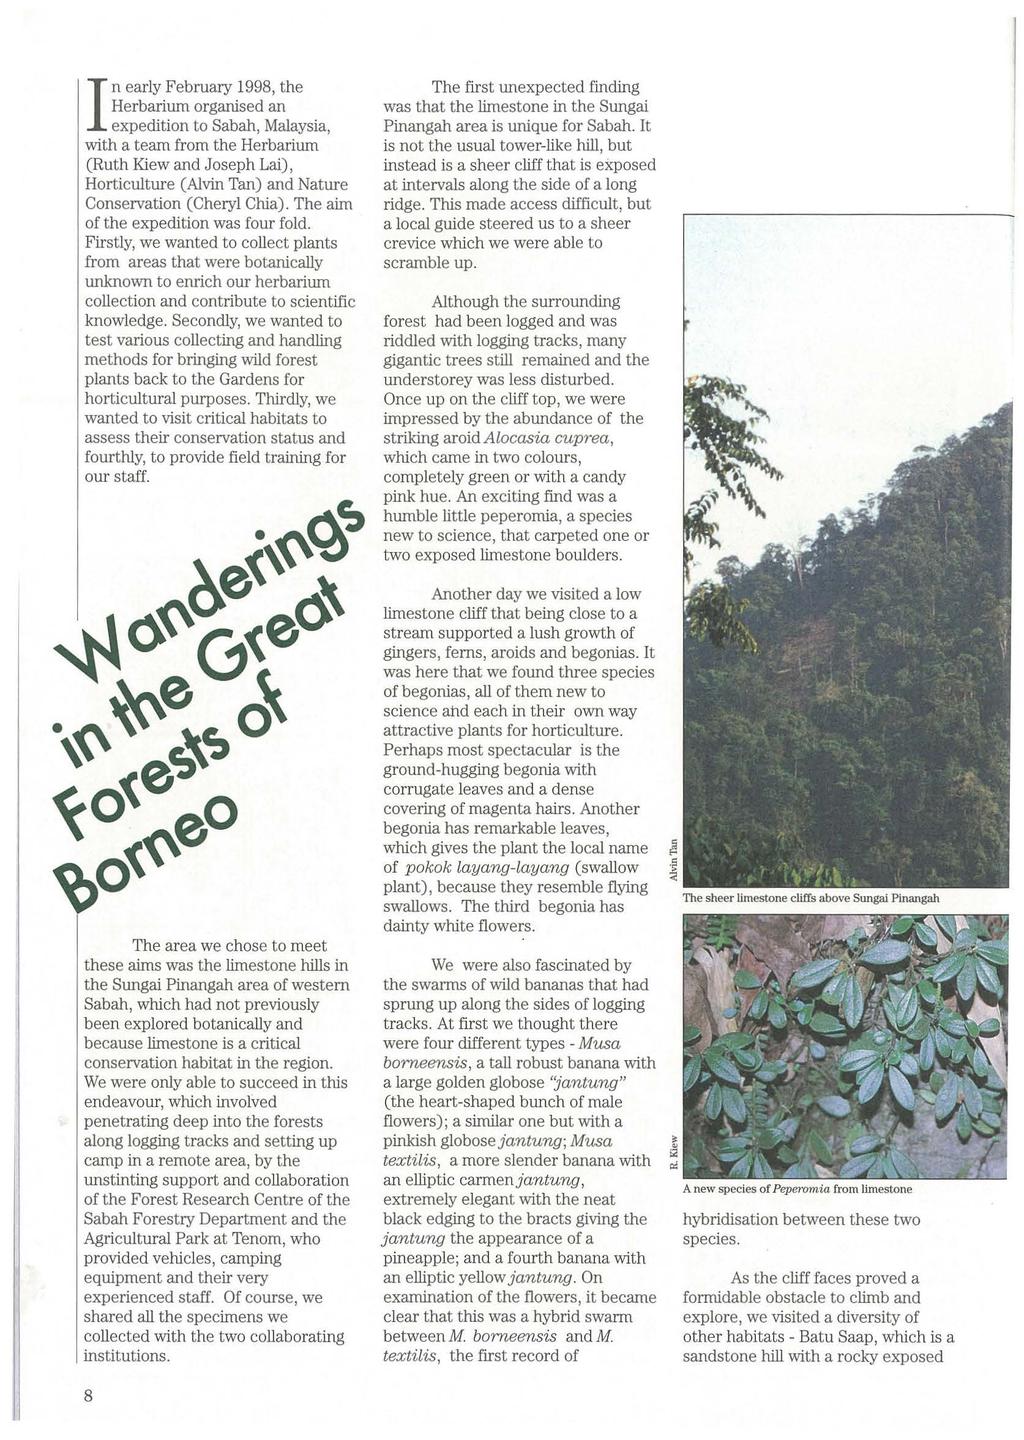 I n early February 1998, the Herbarium organised an expedition to Sabah, Malaysia, with a team from the Herbarium (Ruth Kiew and Joseph Lai), Horticulture (Alvin Tan) and Nature Conservation (Cheryl